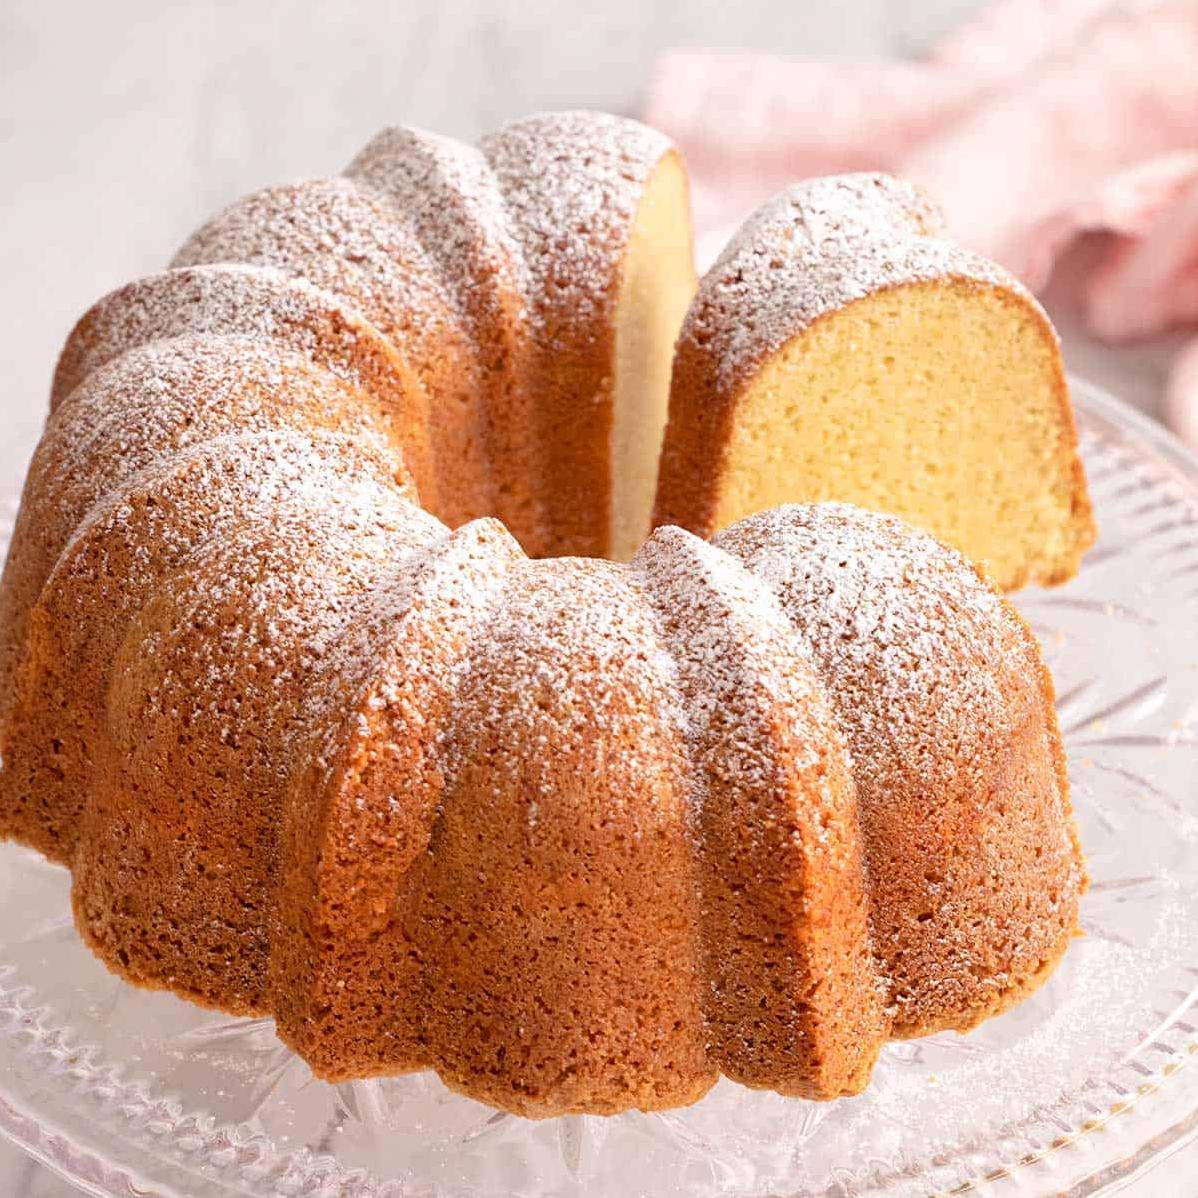  Treat yourself to a warm slice of cake and experience the burst of tangy and sweet flavors in every bite.